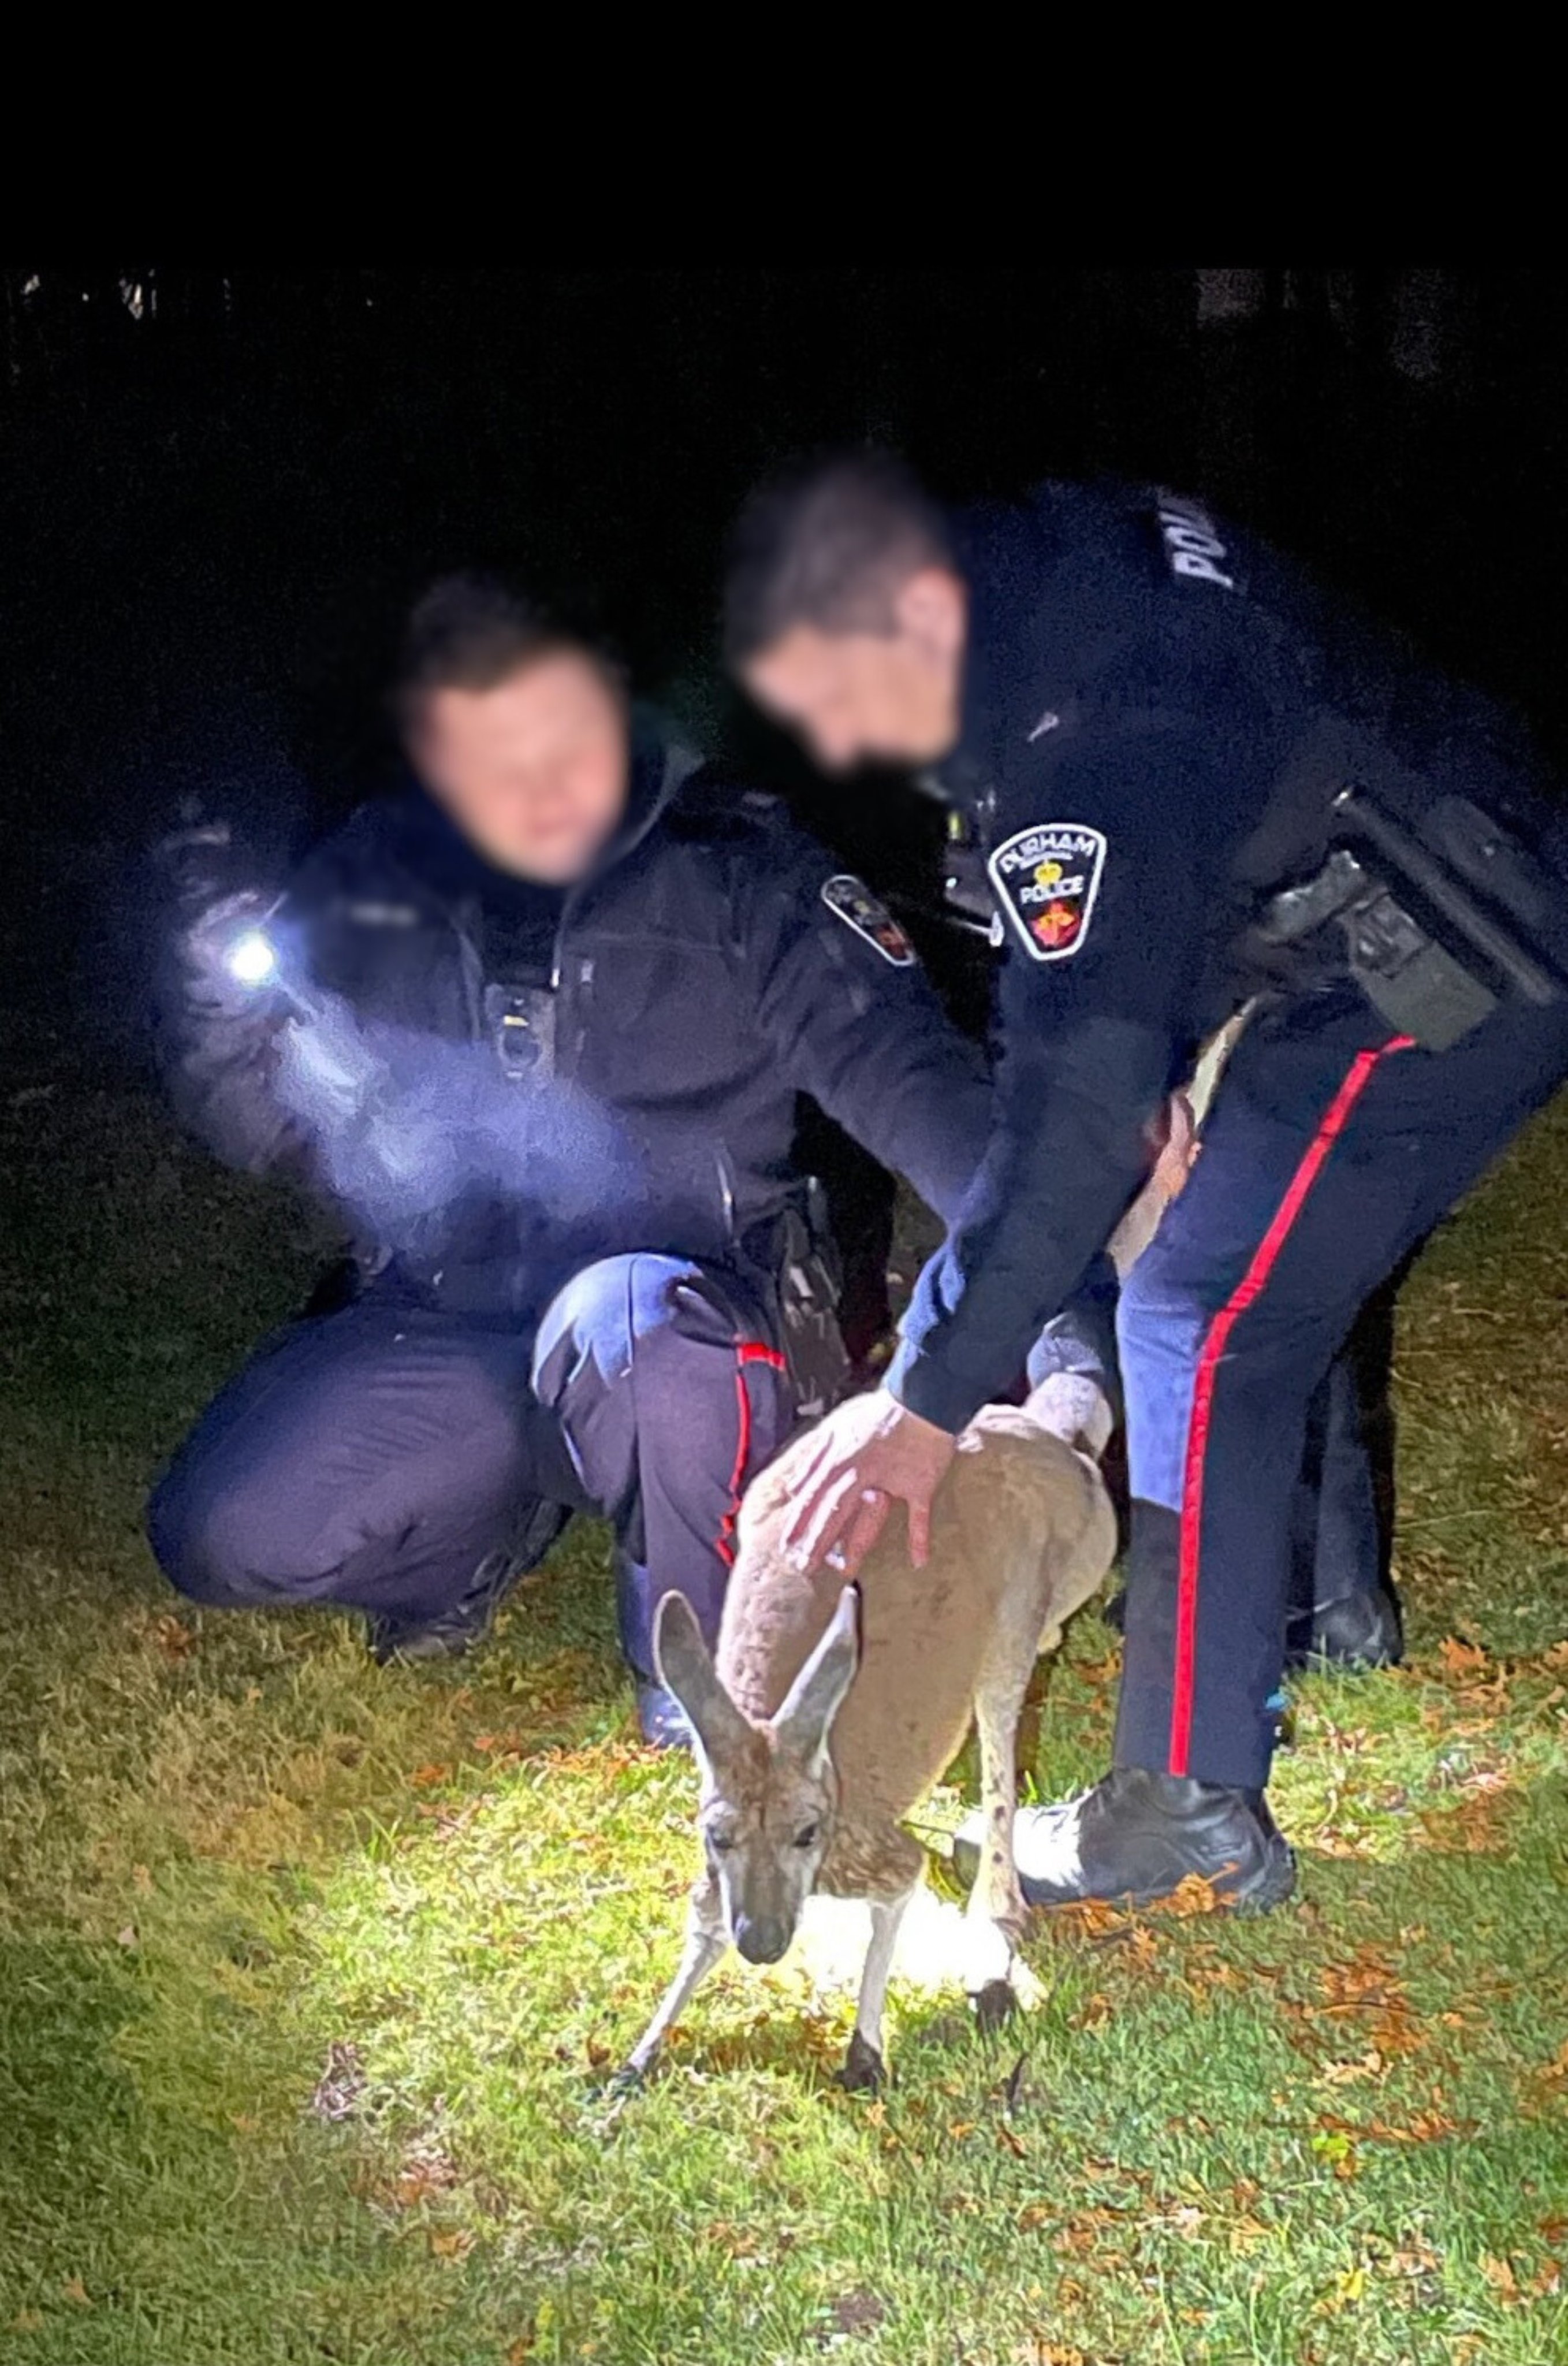 Kangaroo on the loose in Ontario finally caught, officer punched during capture